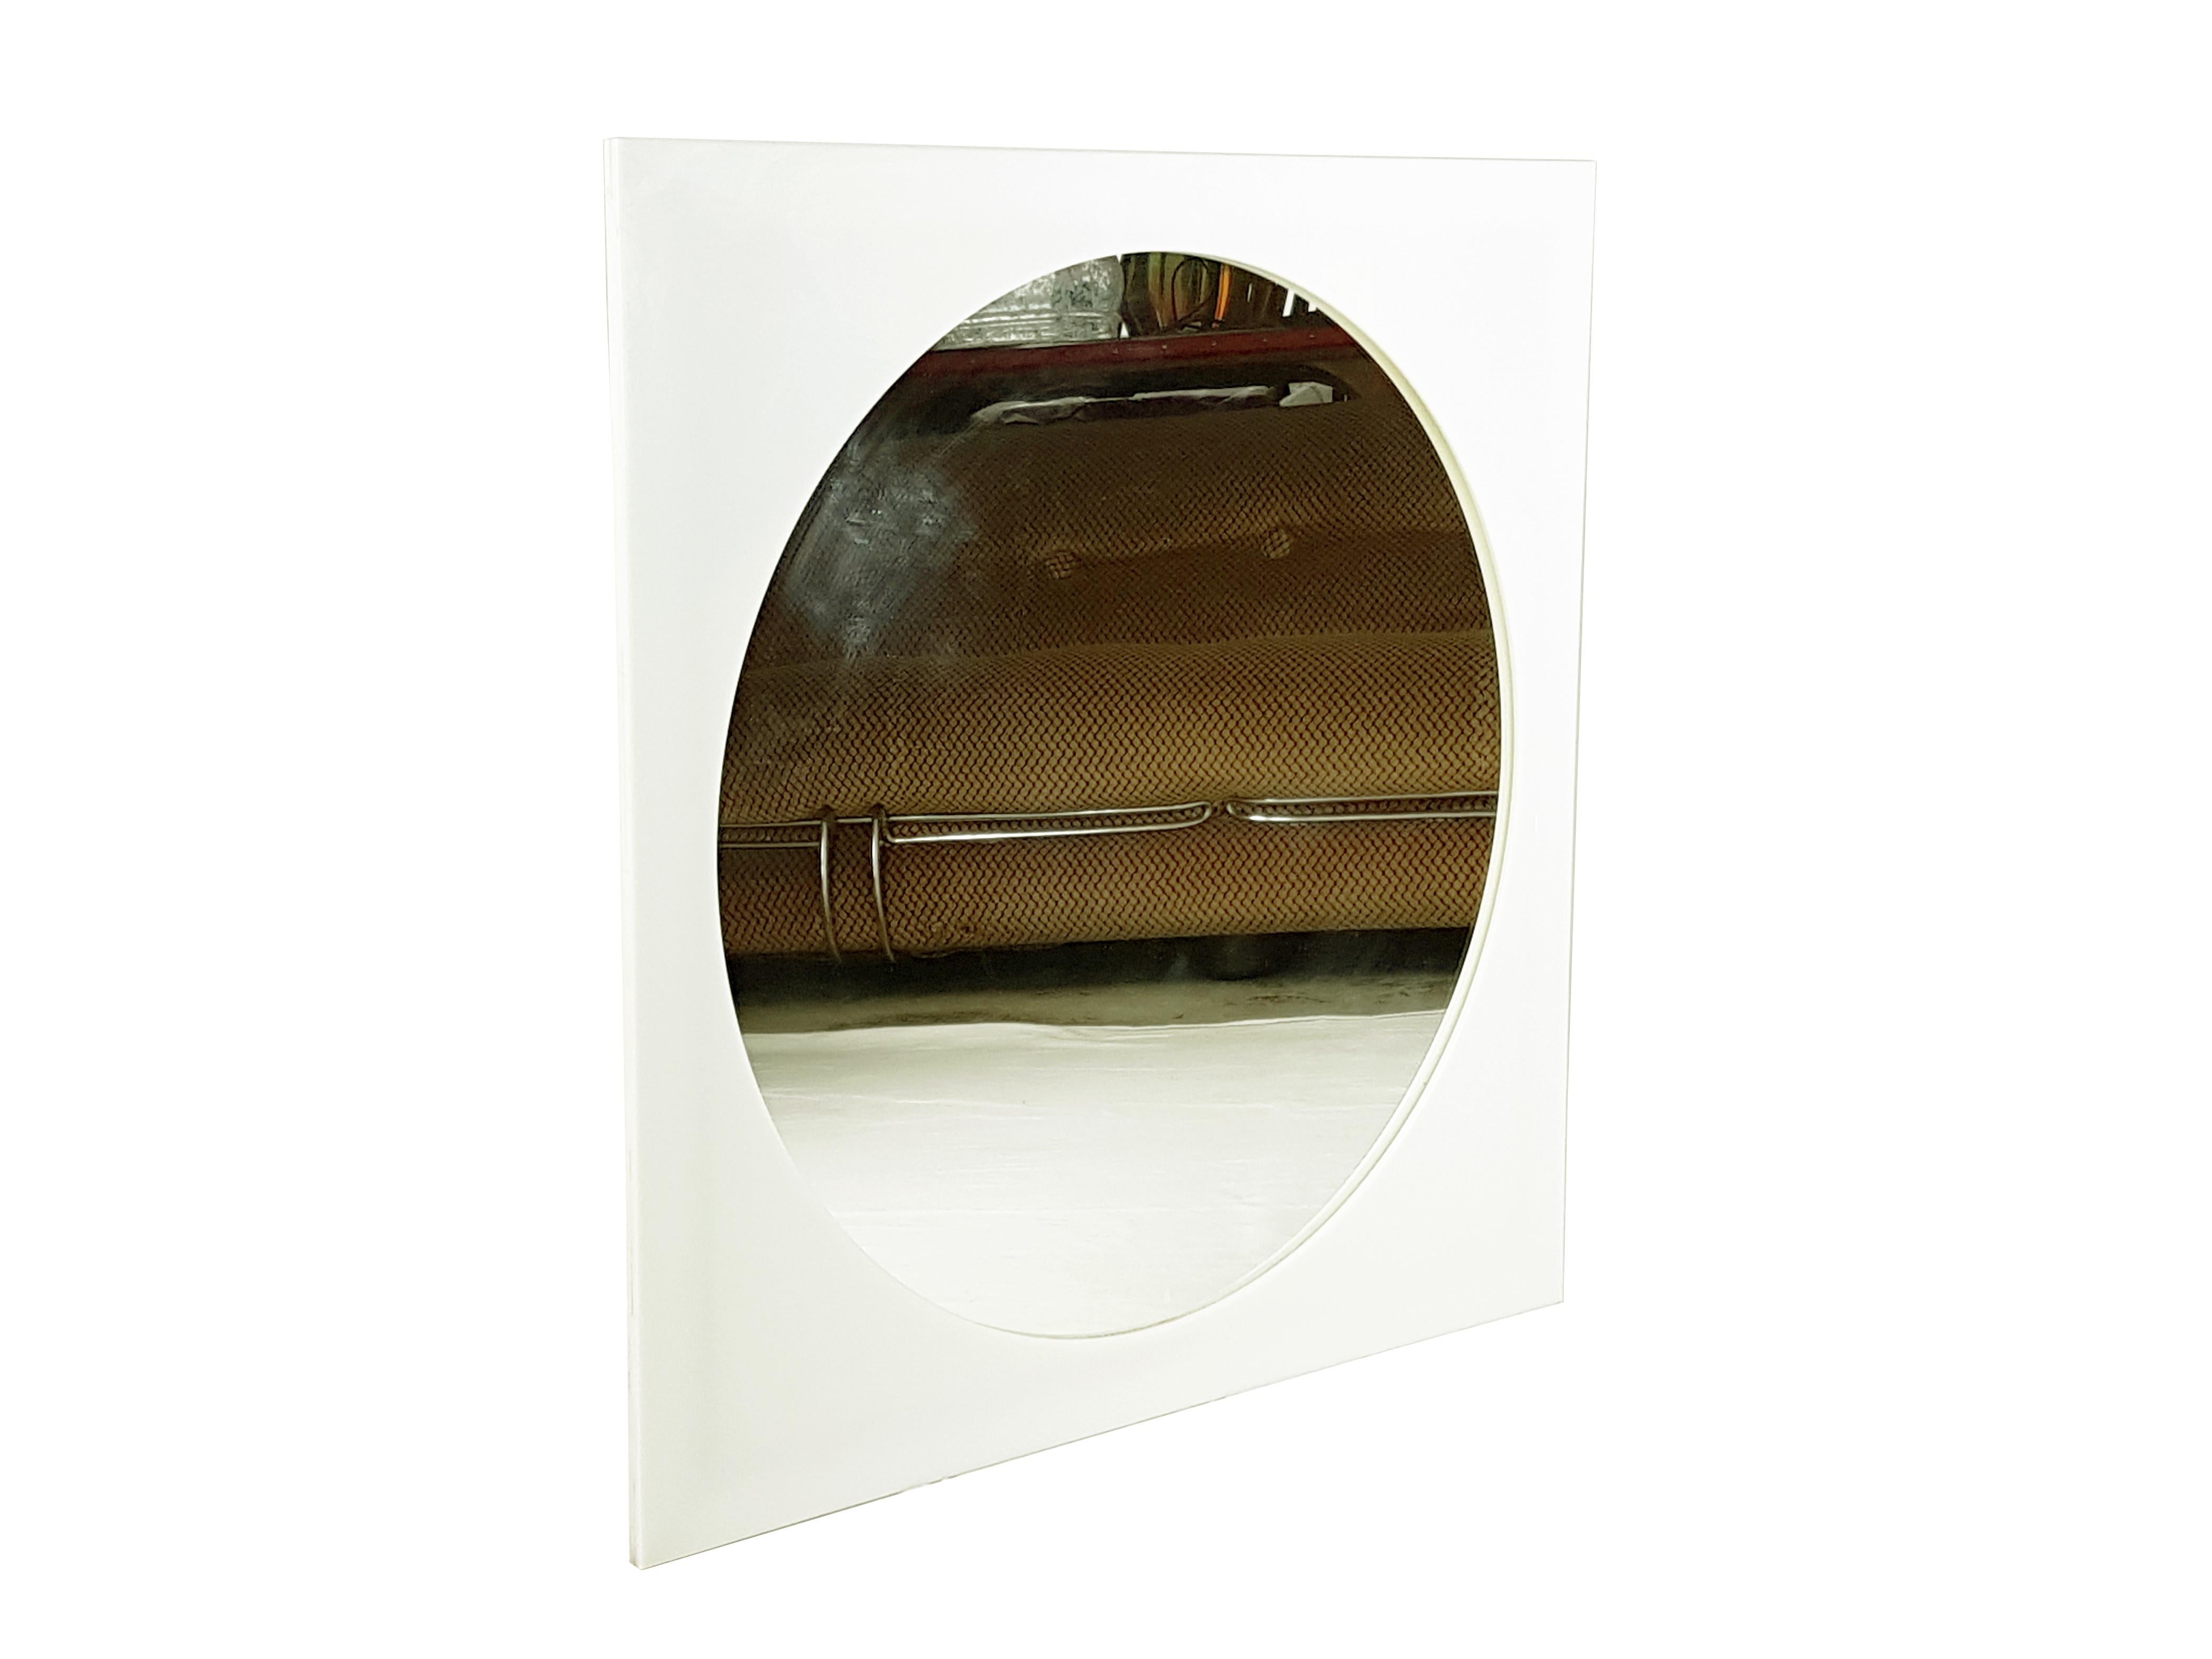 White methacrylate square wall mirror design by Gino Colombini and produced by Kartell in the 1970s.
Good condition: a very small chip on one corner. a few darker lines along one side.